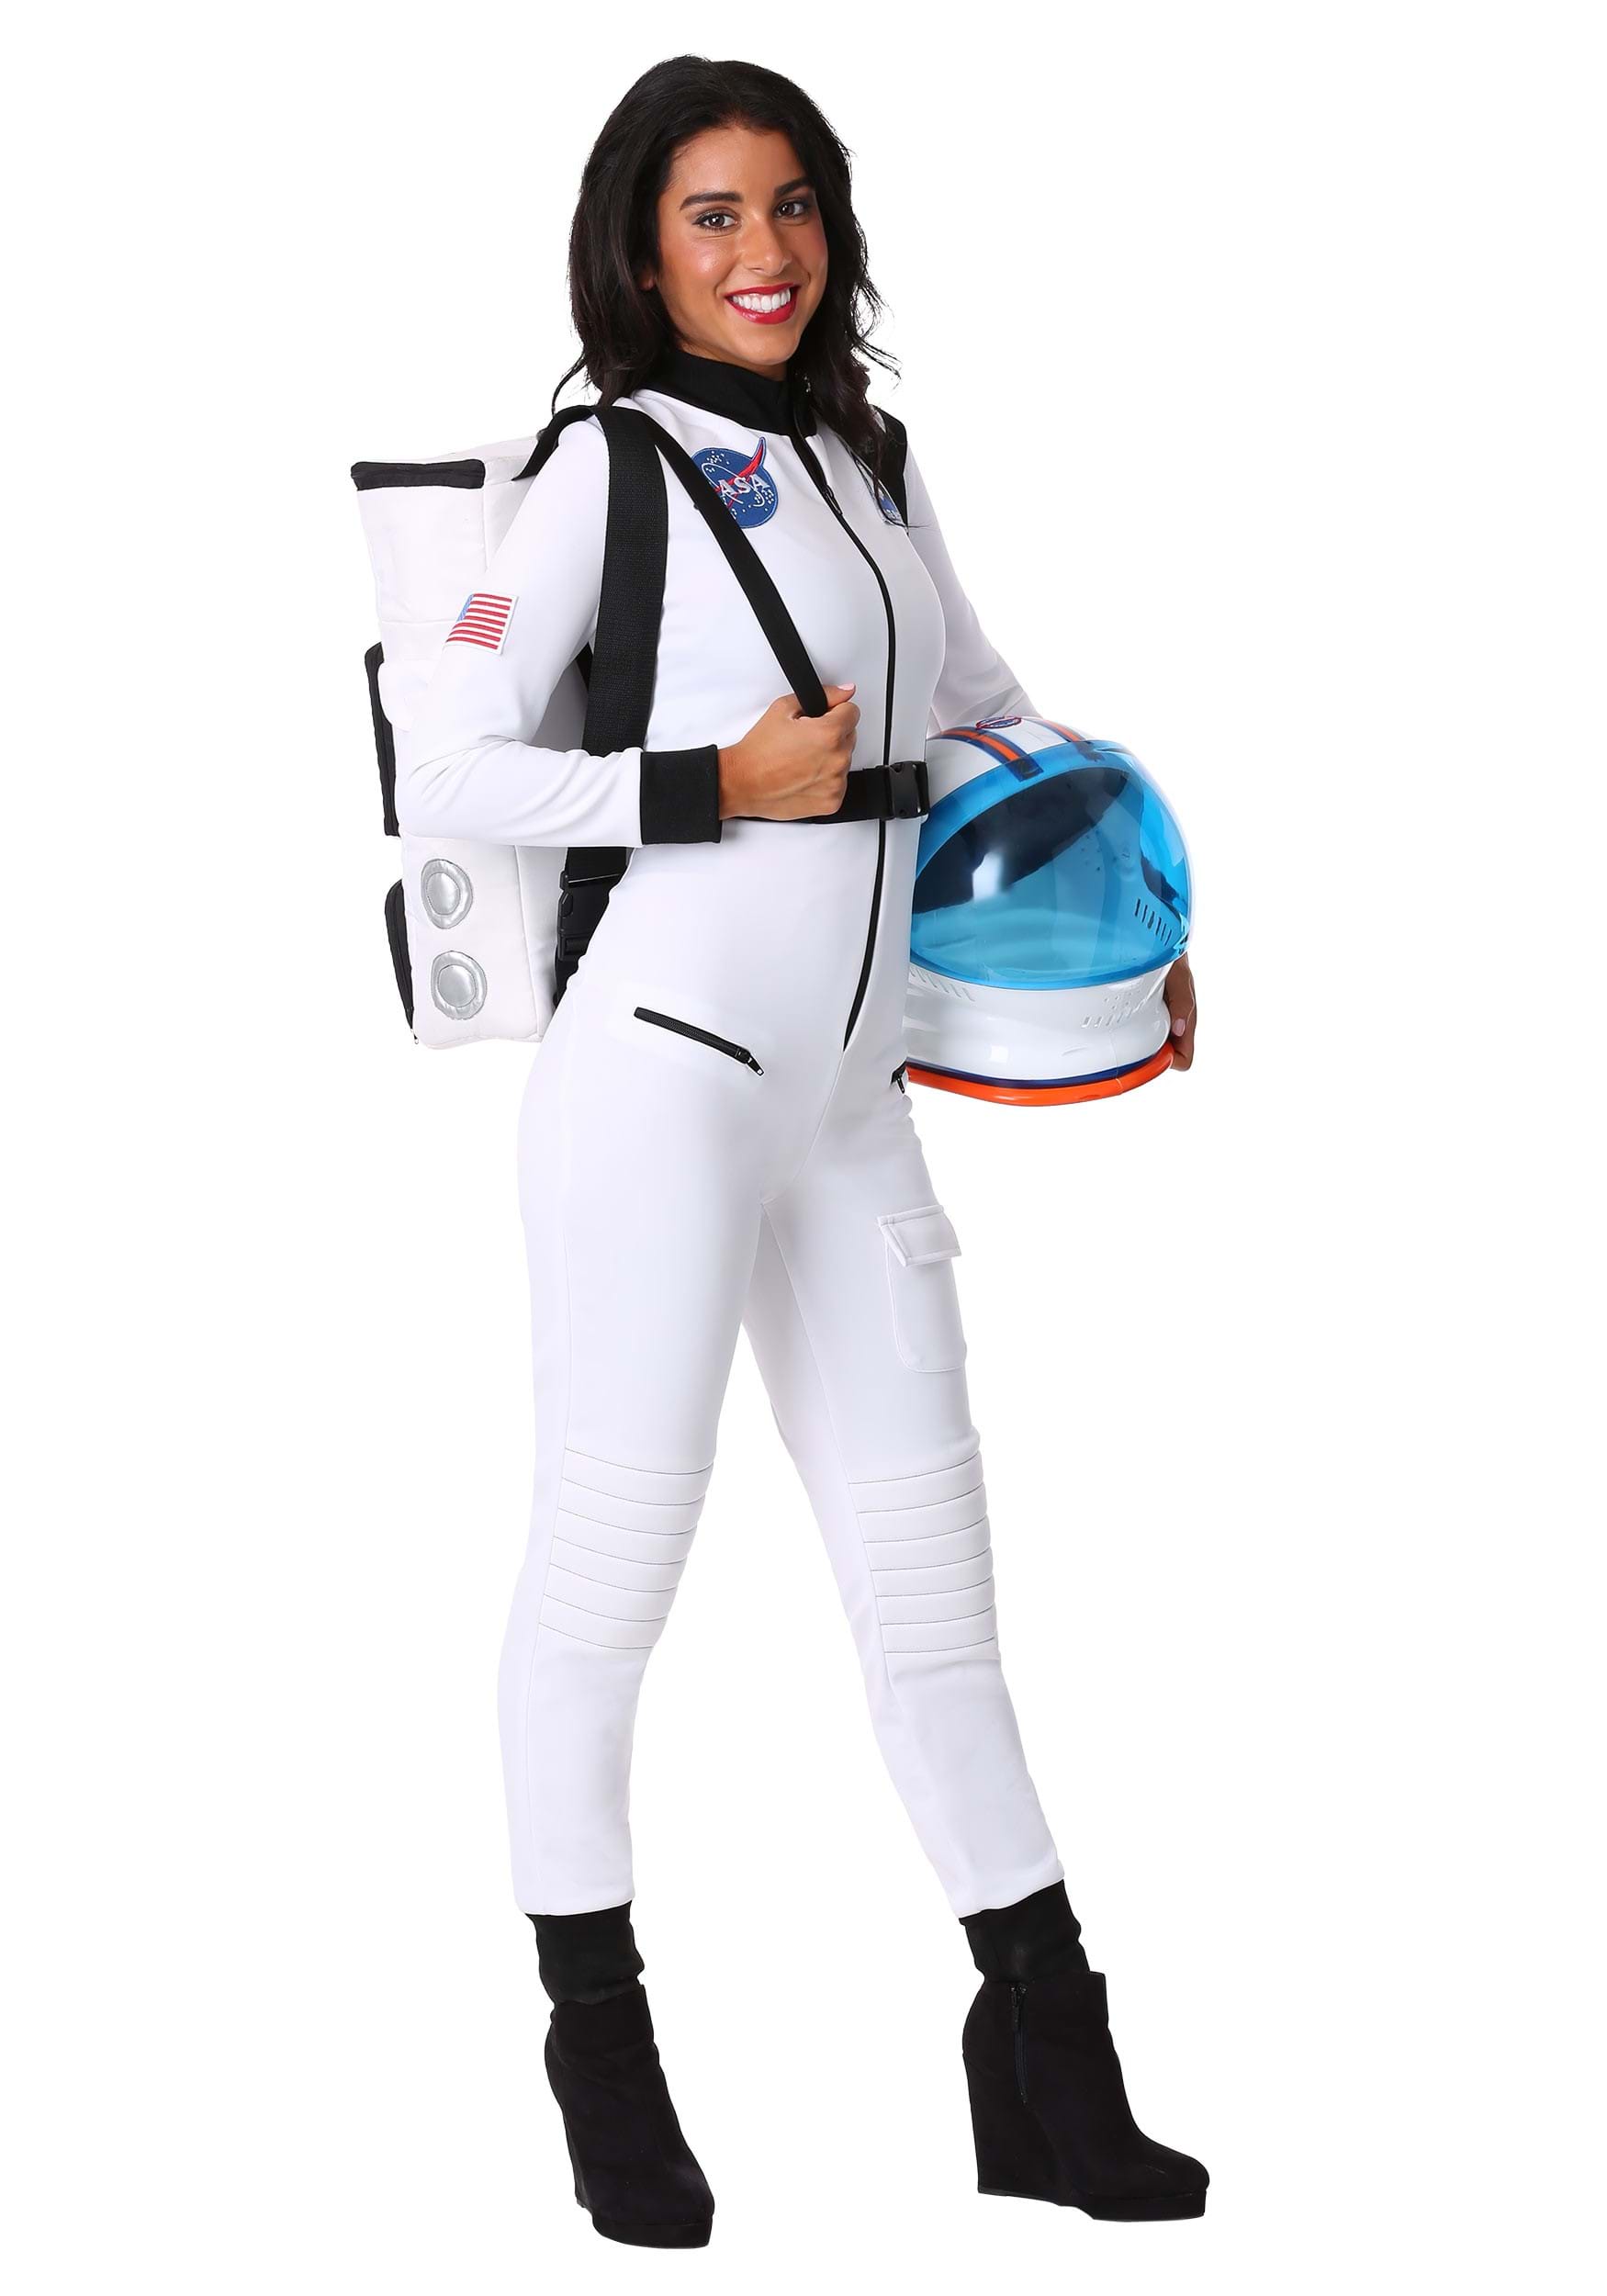 https://images.fun.com/products/44982/1-1/womens-white-astronaut-suit-costume.jpg